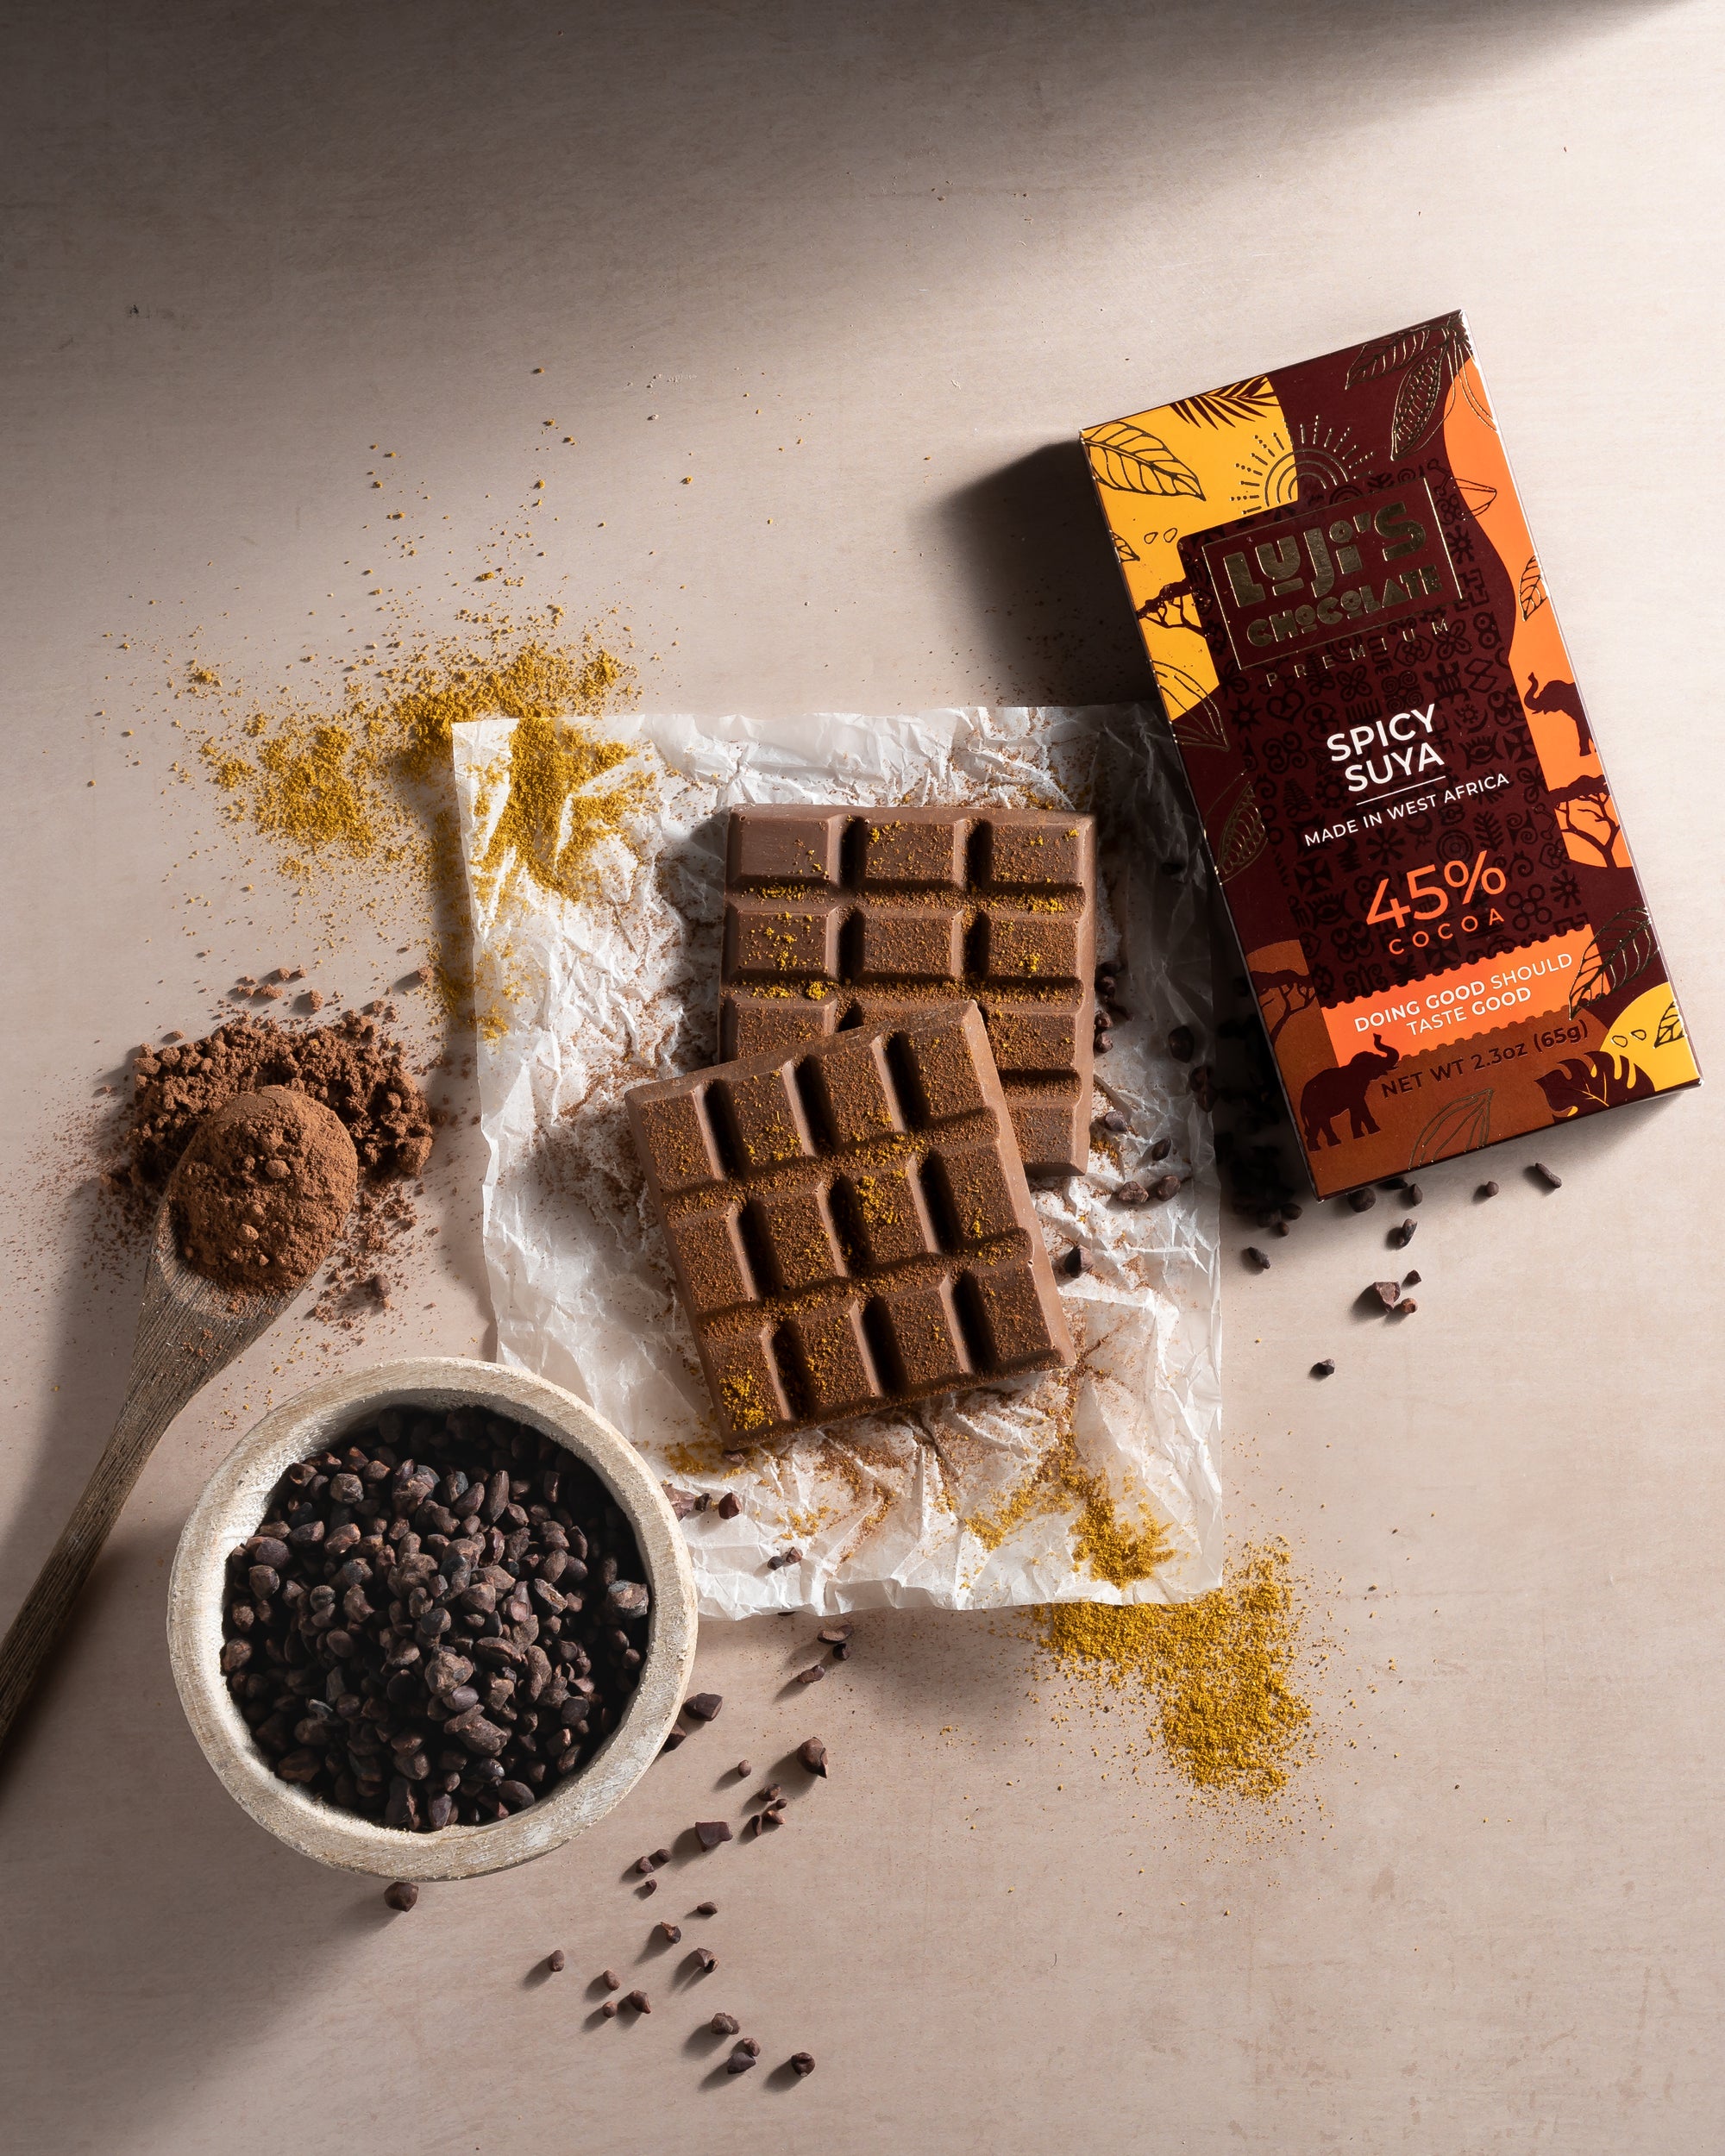 Luji's Spicy Suya Chocolate bar displayed with a spoonful of suya spices and cocoa nibs, highlighting the spicy and chocolaty elements that make up the bar's unique flavor, on a parchment paper backdrop.